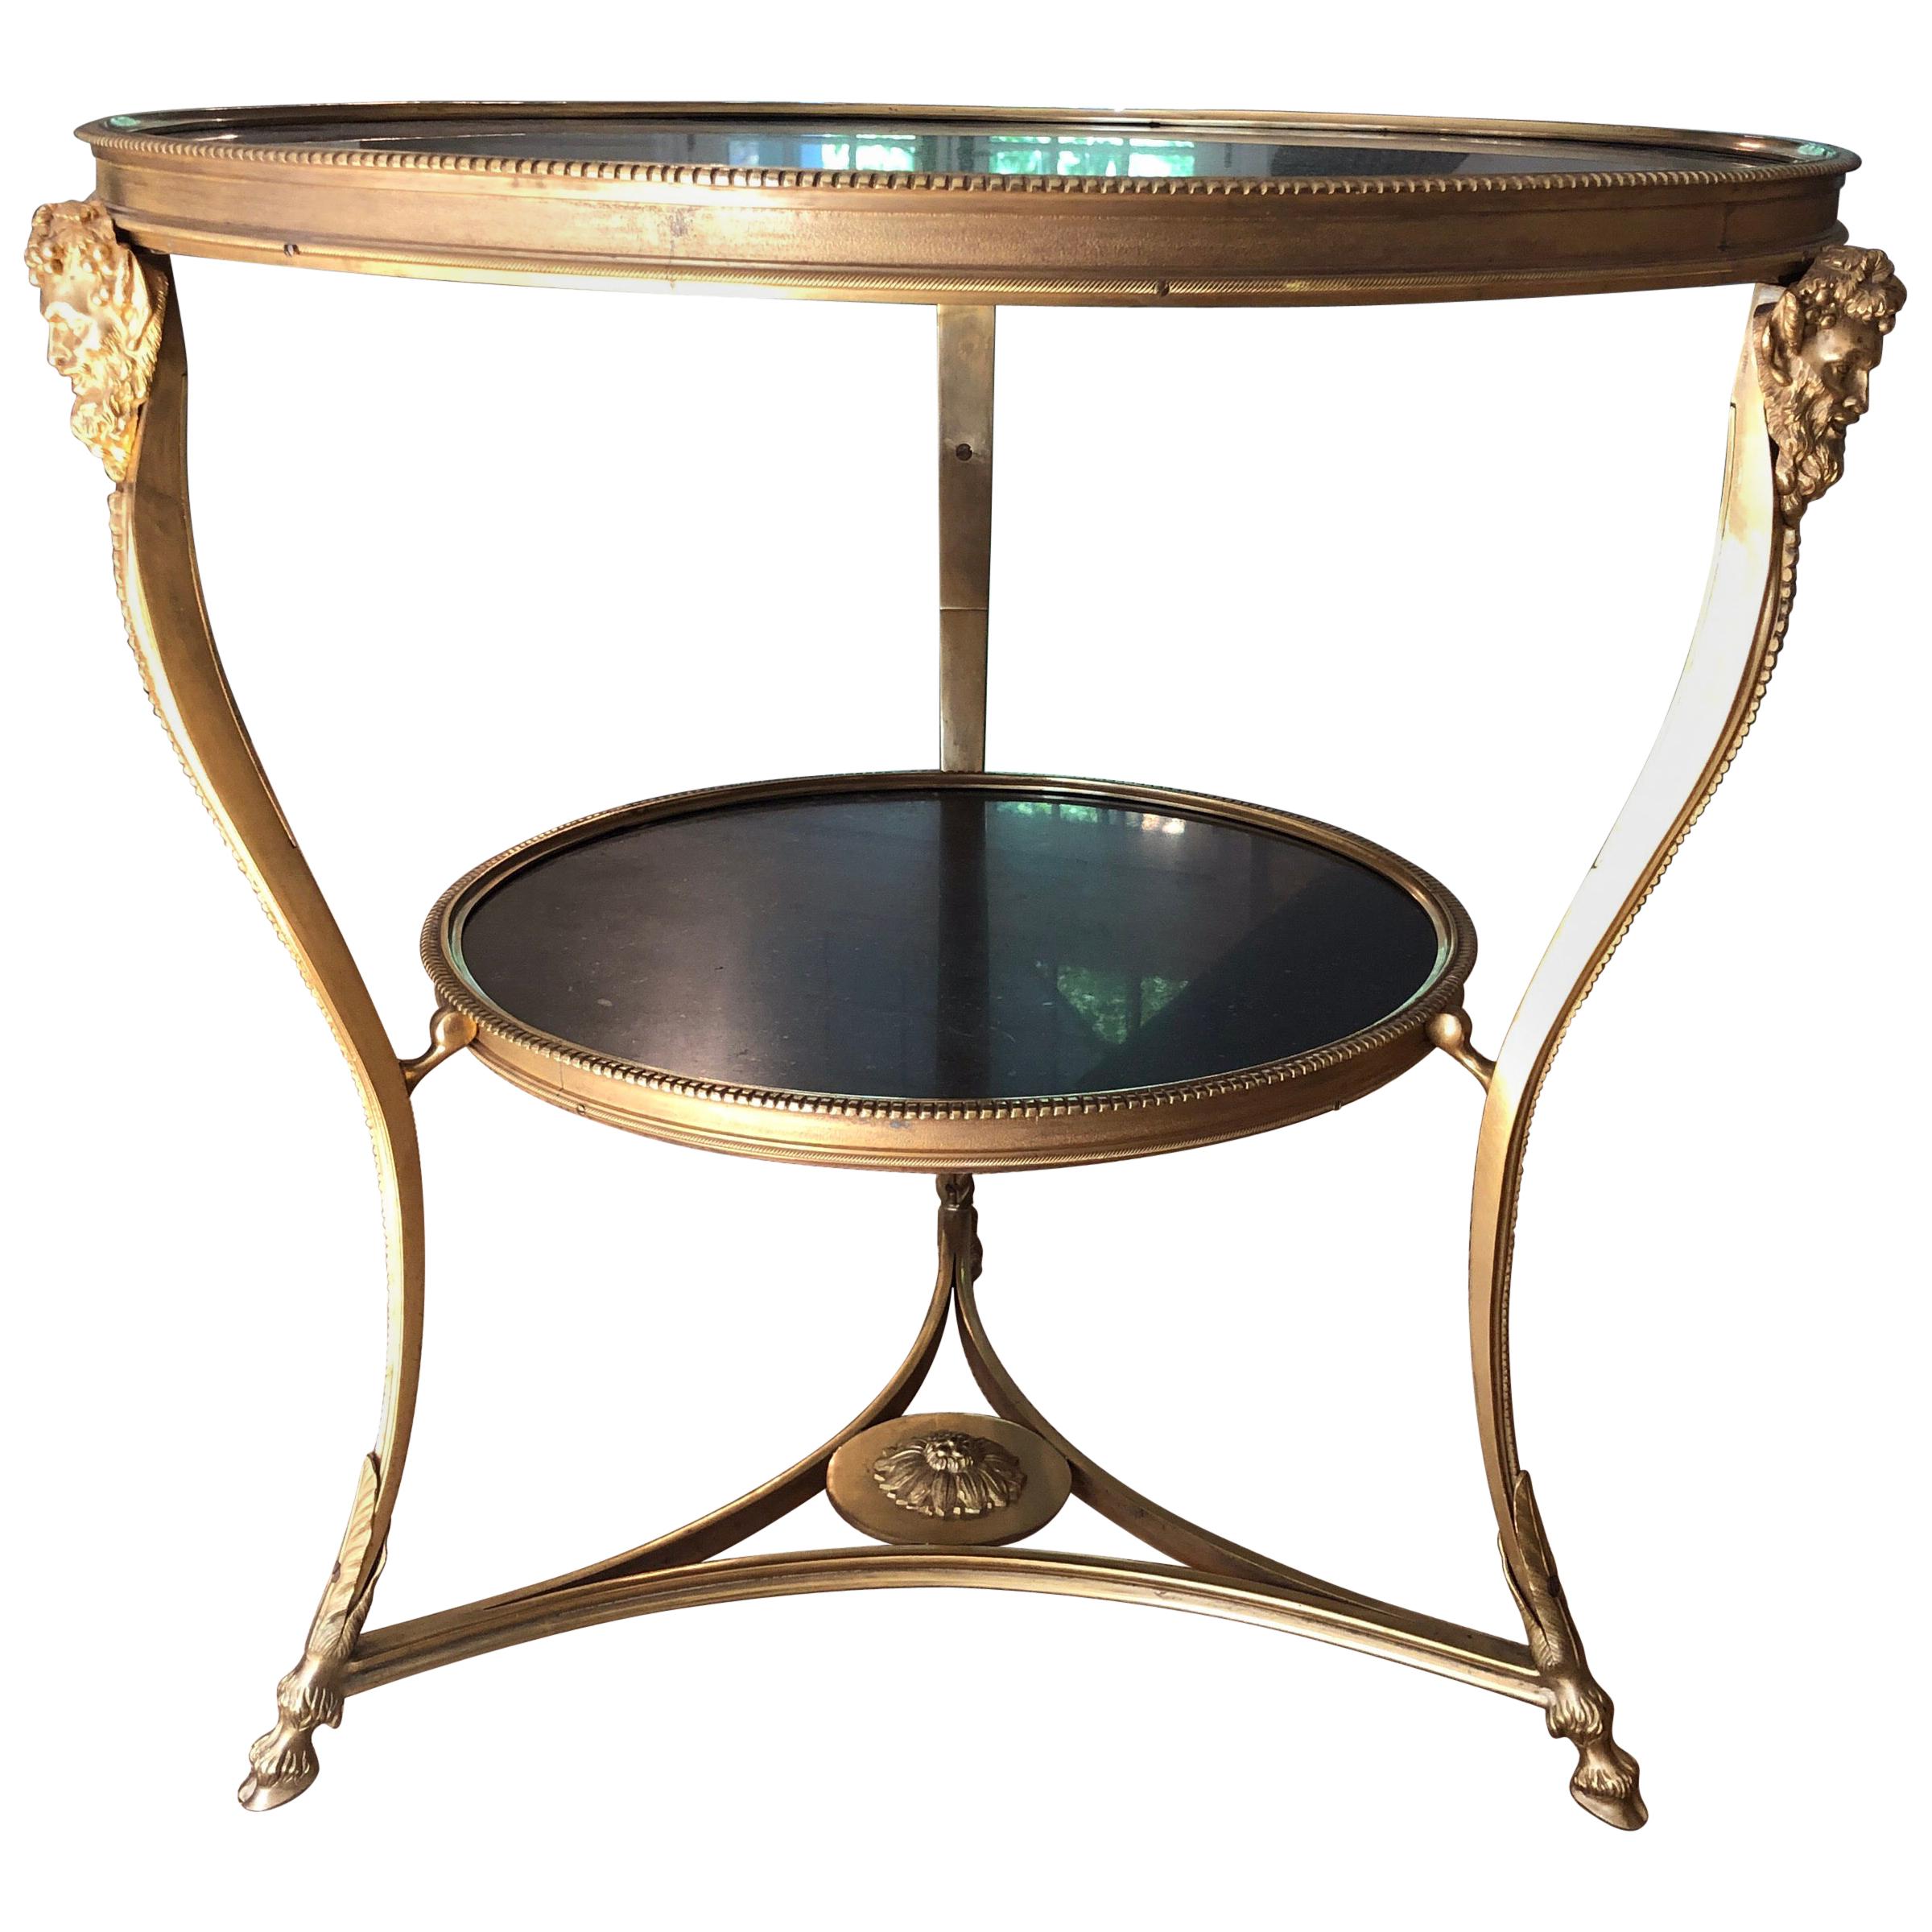 Directoire Style Gilt Bronze Gueridon Table with Dark Marble Top